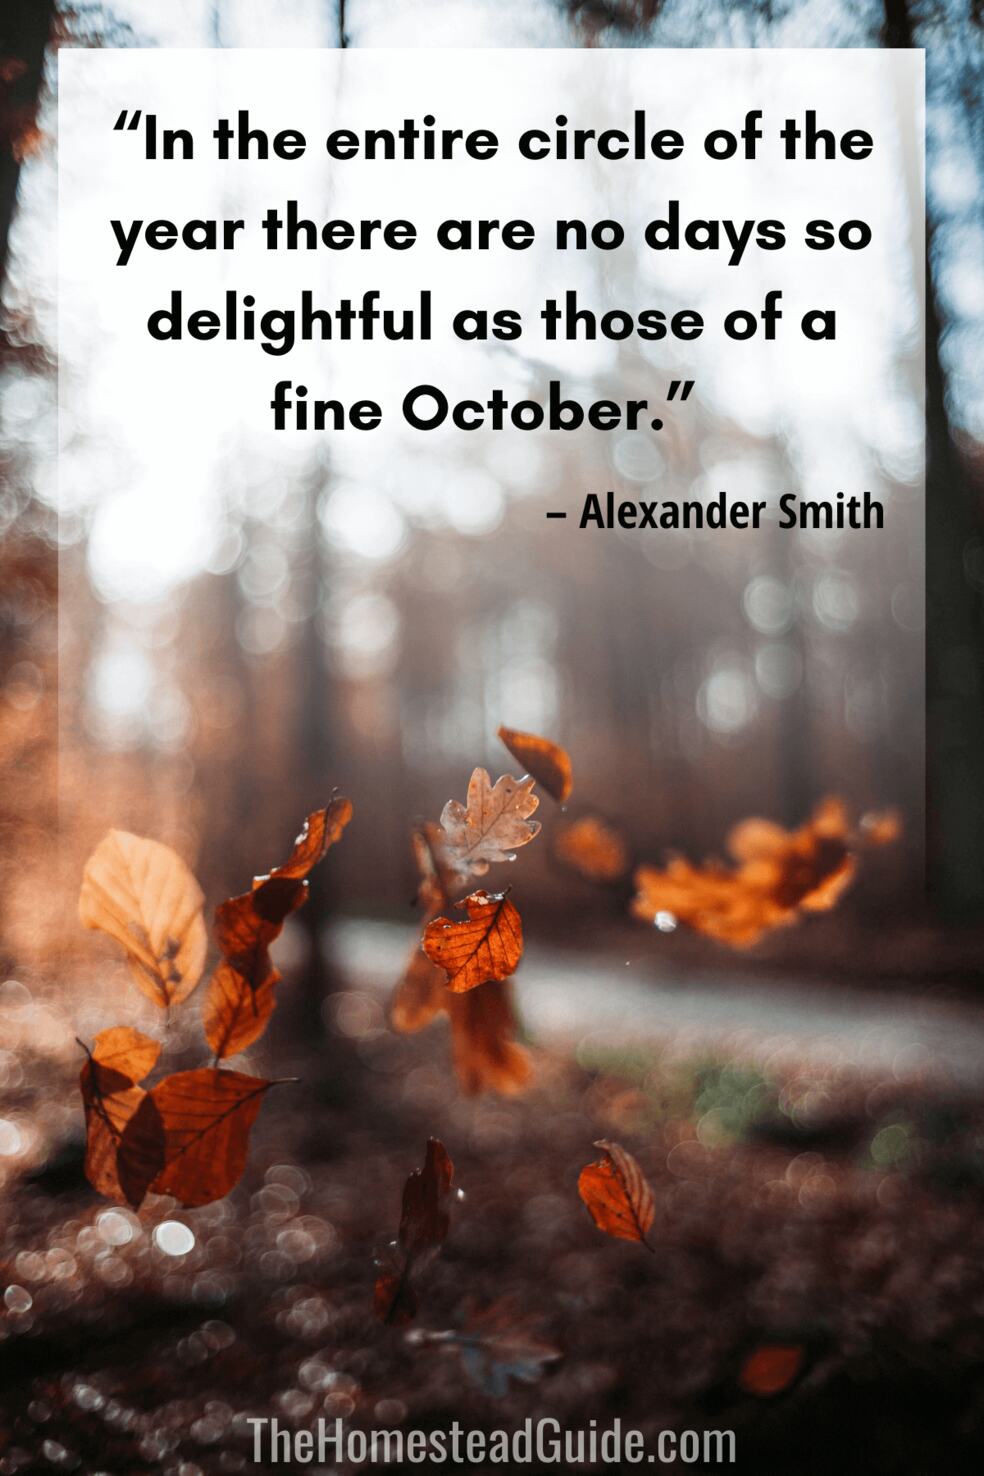 In the entire circle of the year there are no days so delightful as those of a fine October.